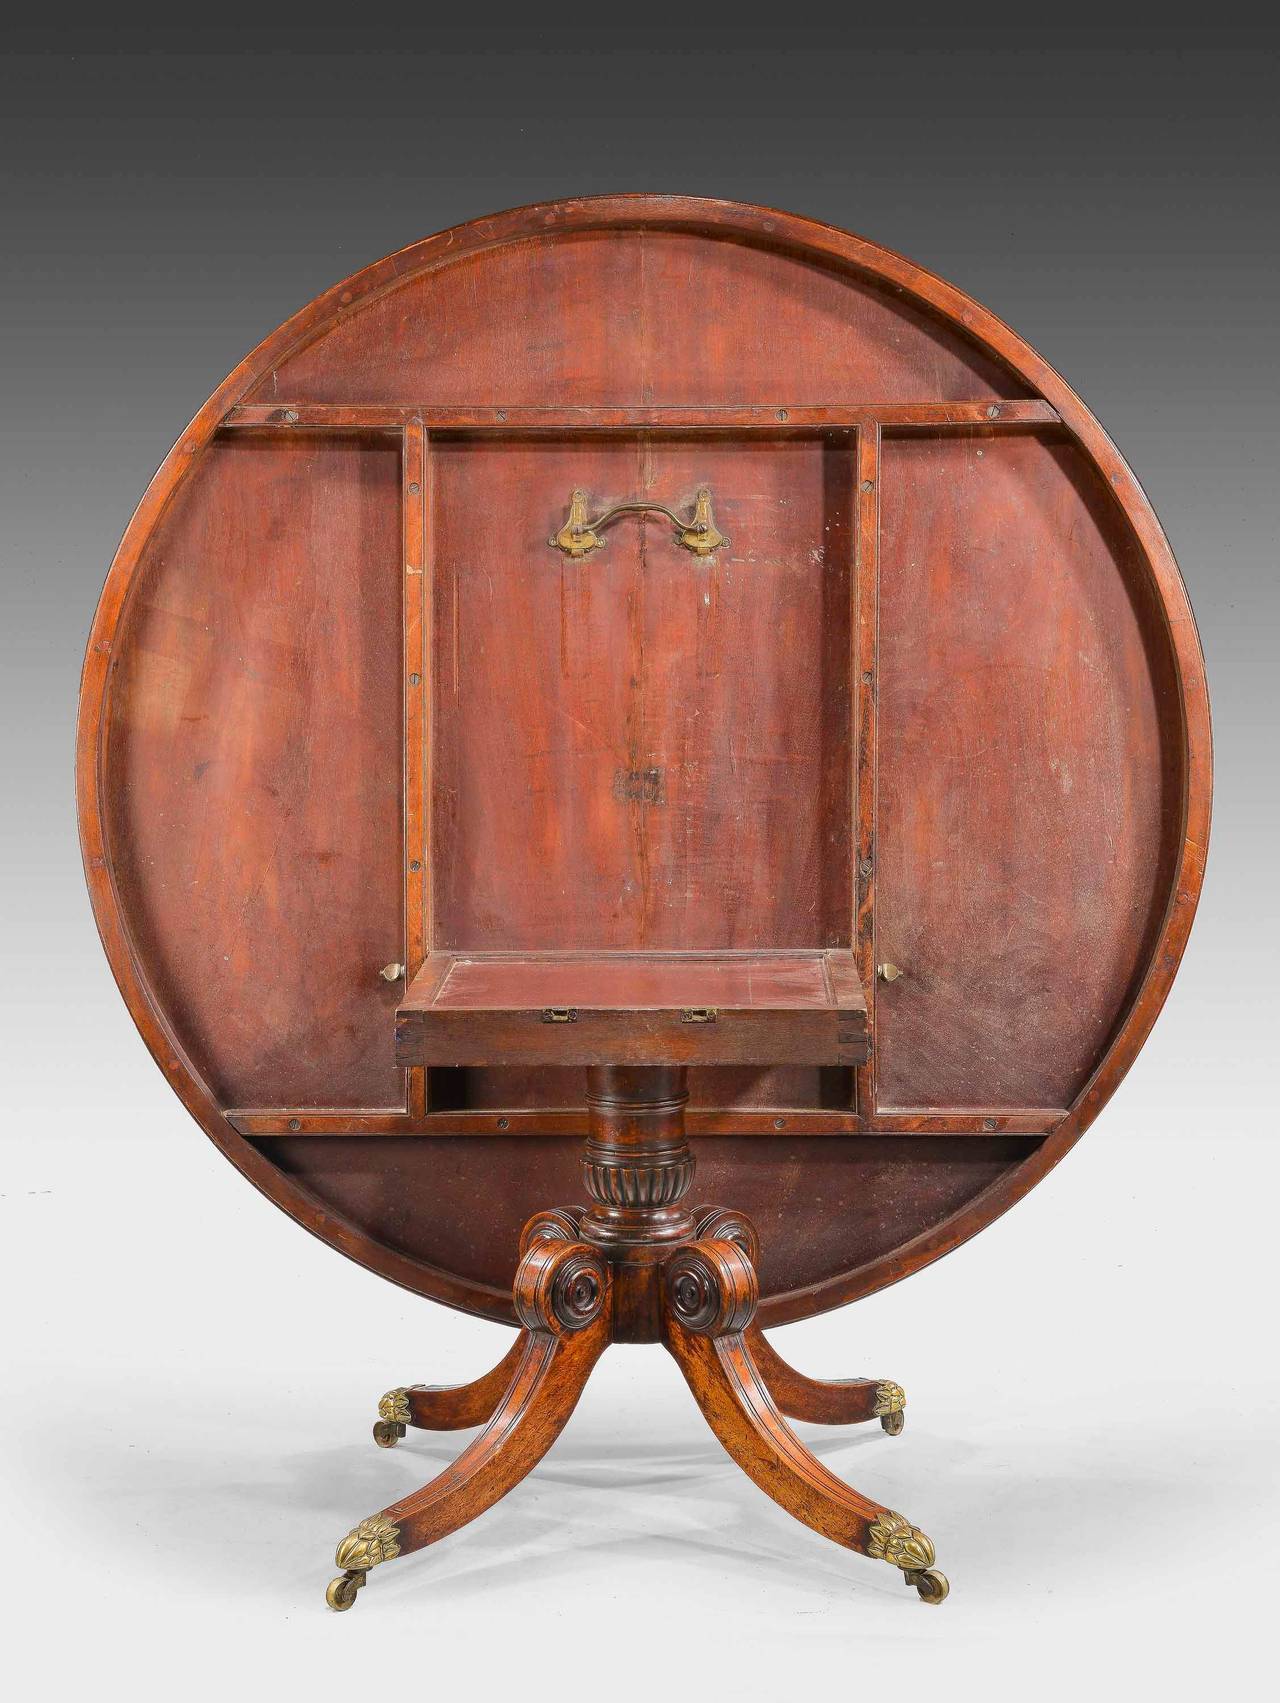 Regency Period Mahogany Circular Table In Excellent Condition In Peterborough, Northamptonshire